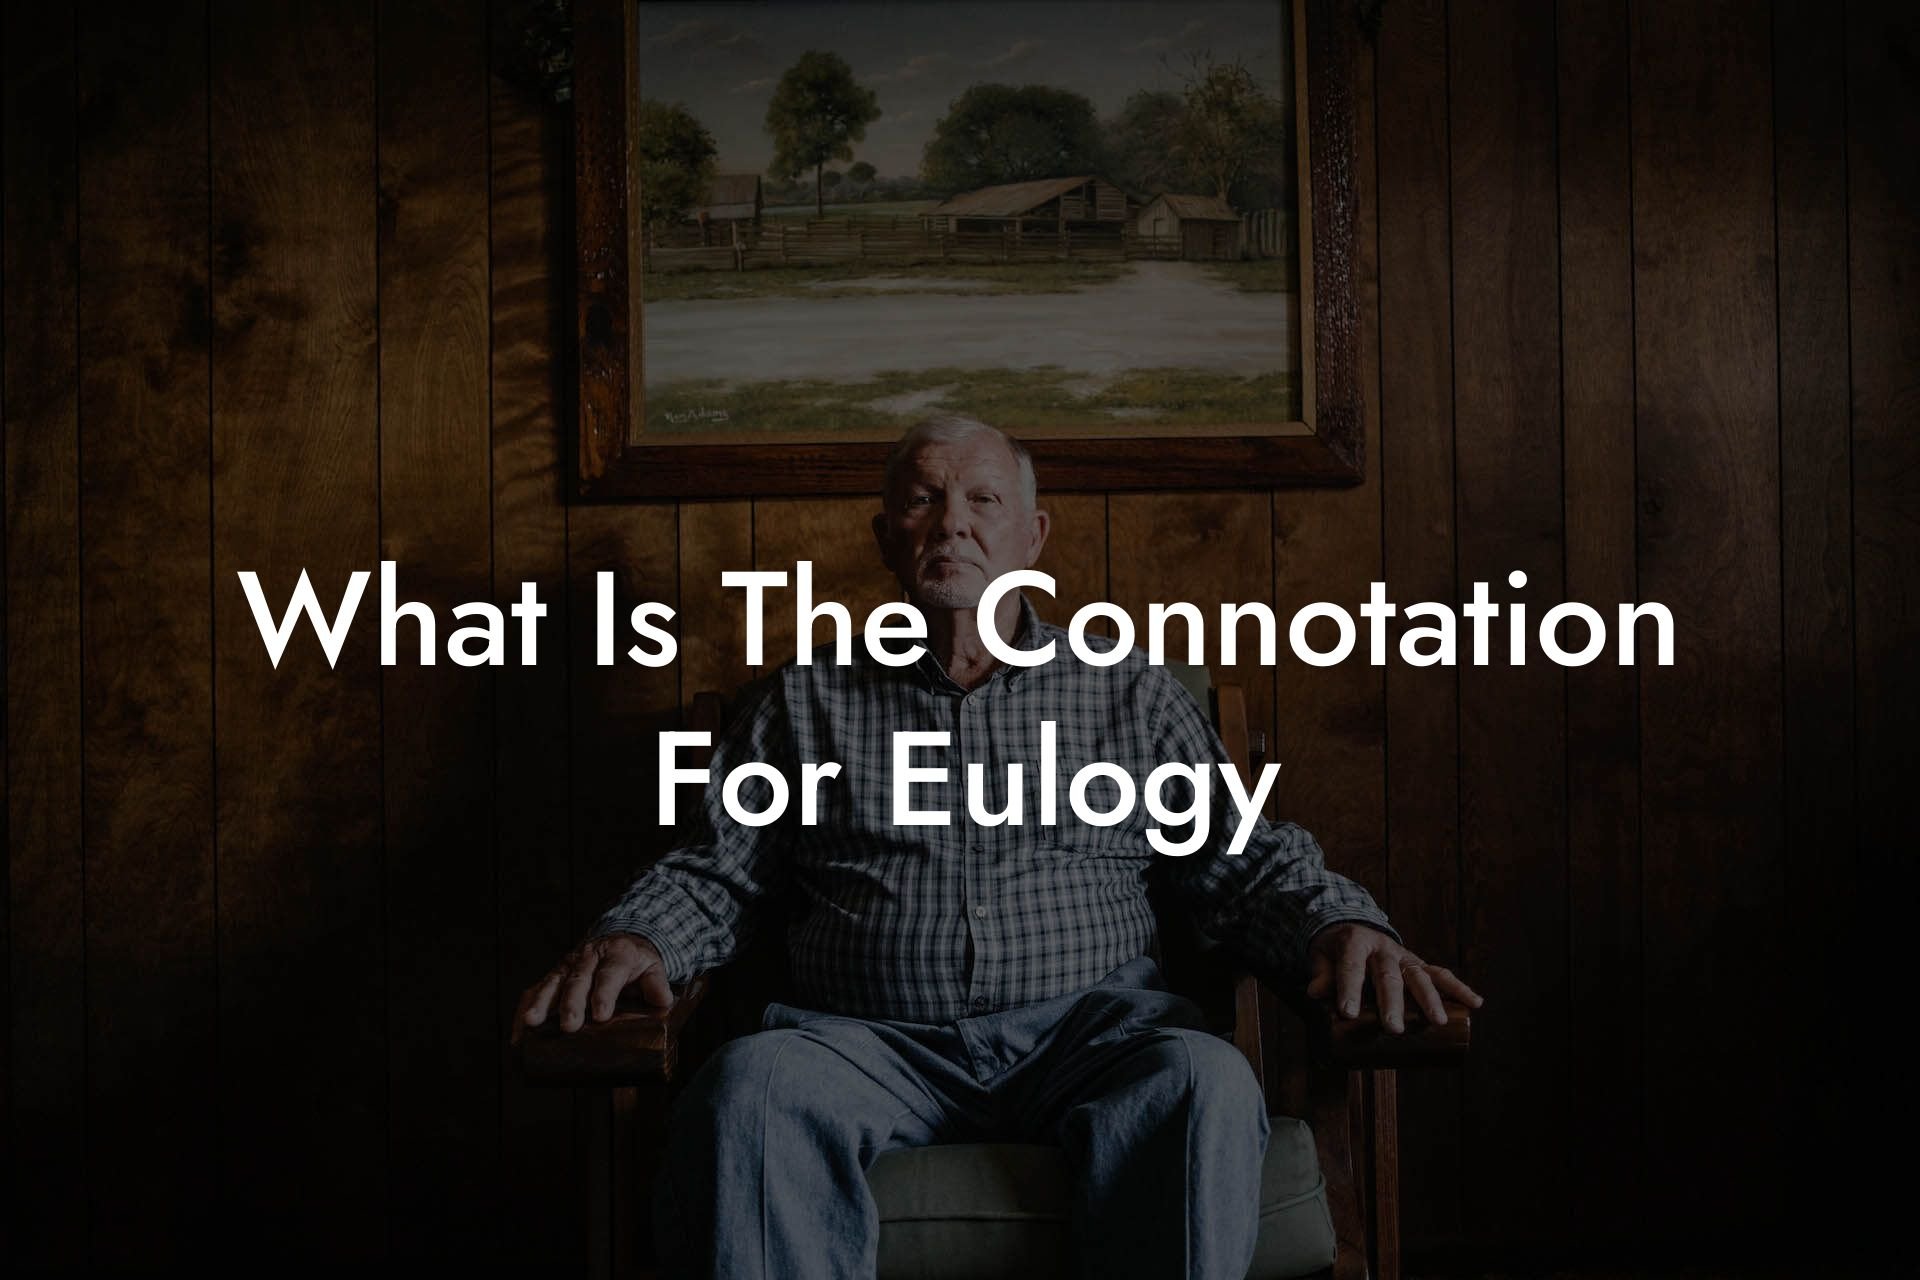 What Is The Connotation For Eulogy